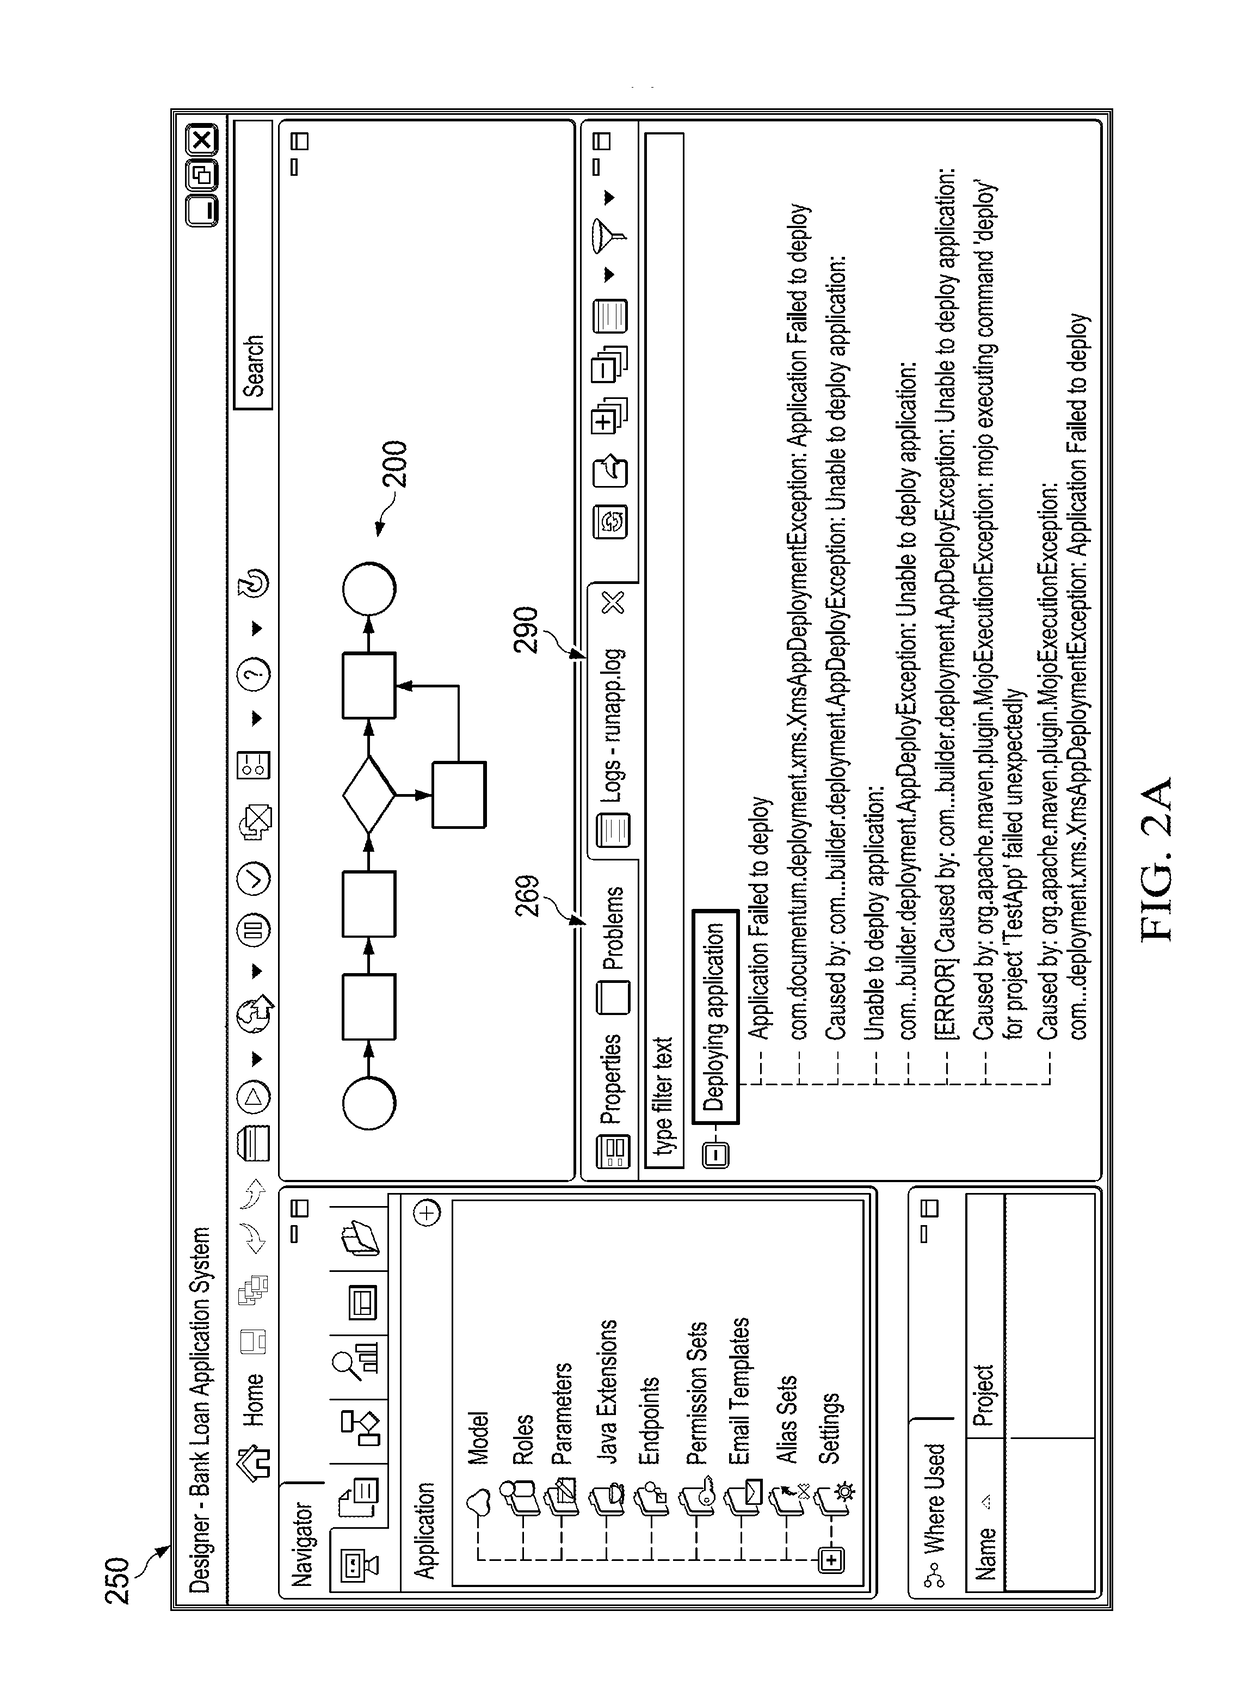 Systems and methods for diagnosing problems from error logs using natural language processing